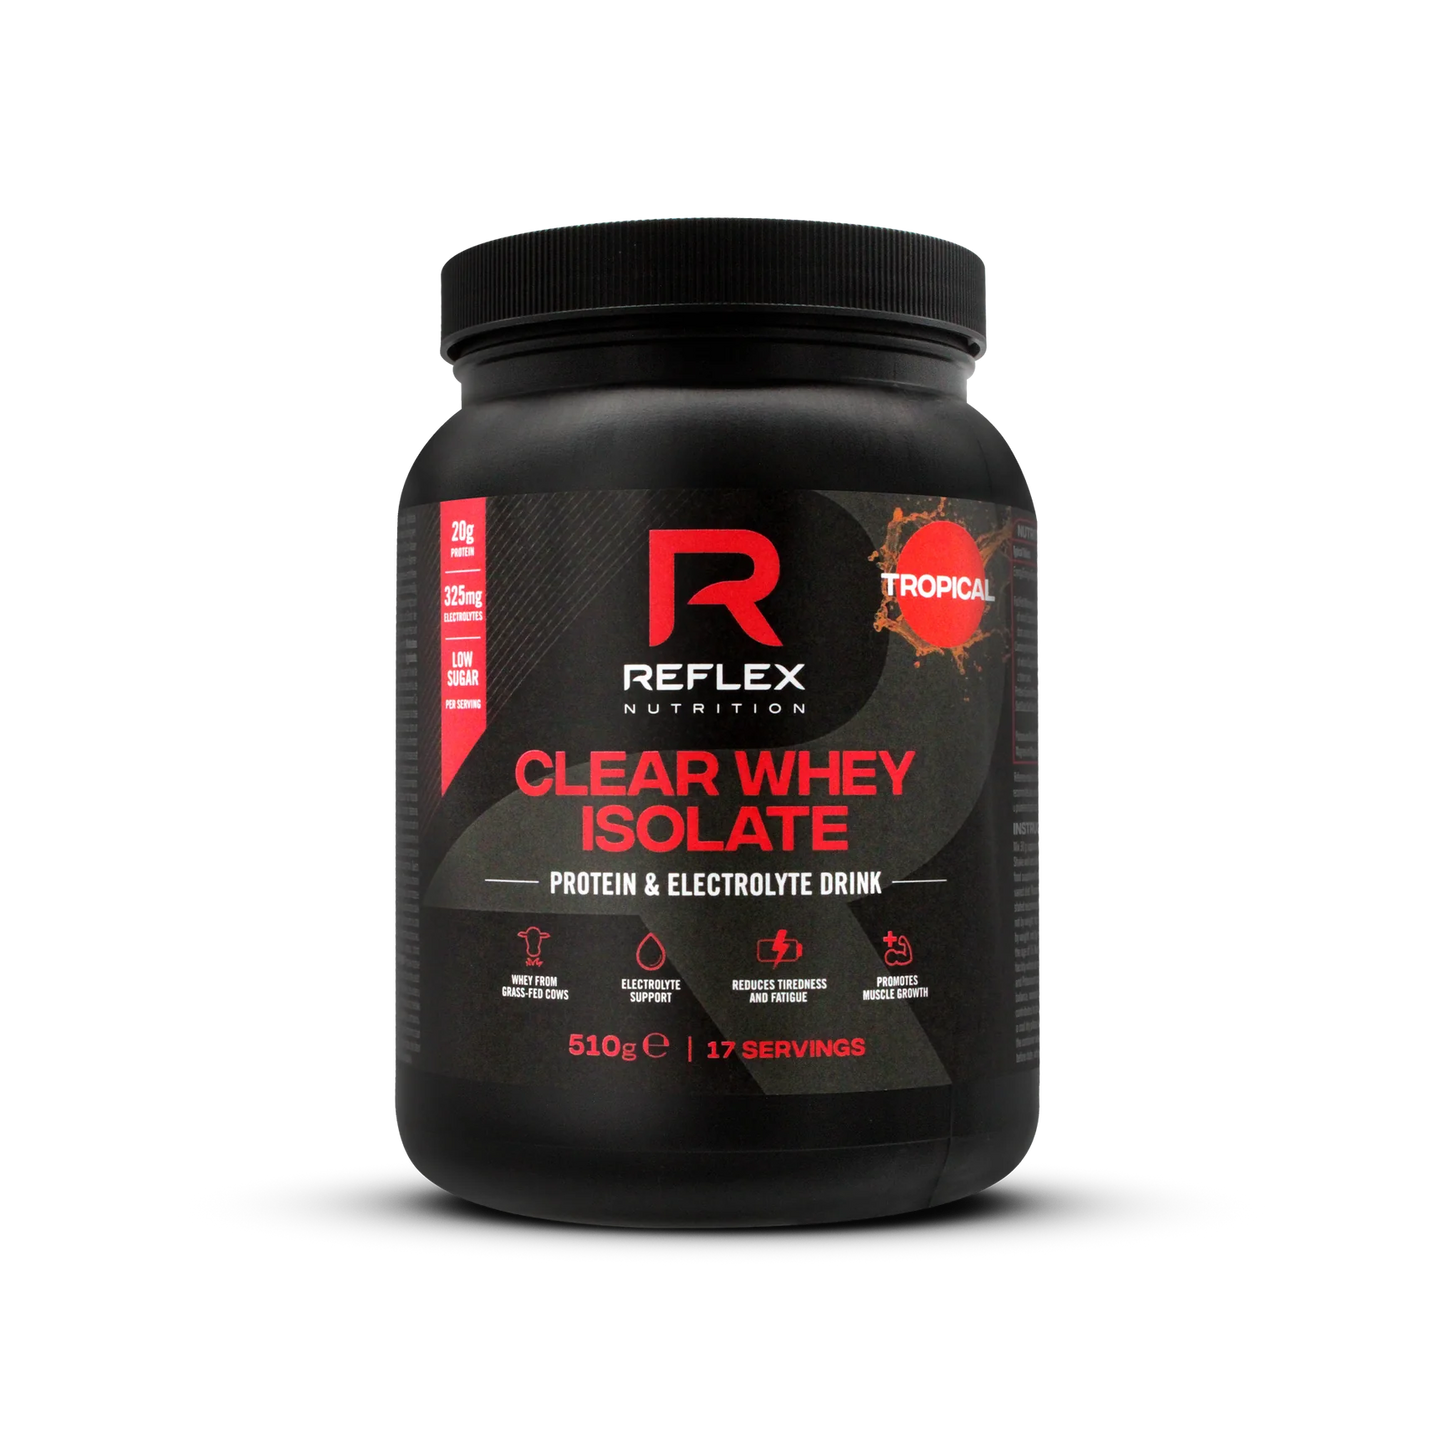 Reflex Nutrition Clear Whey Isolate